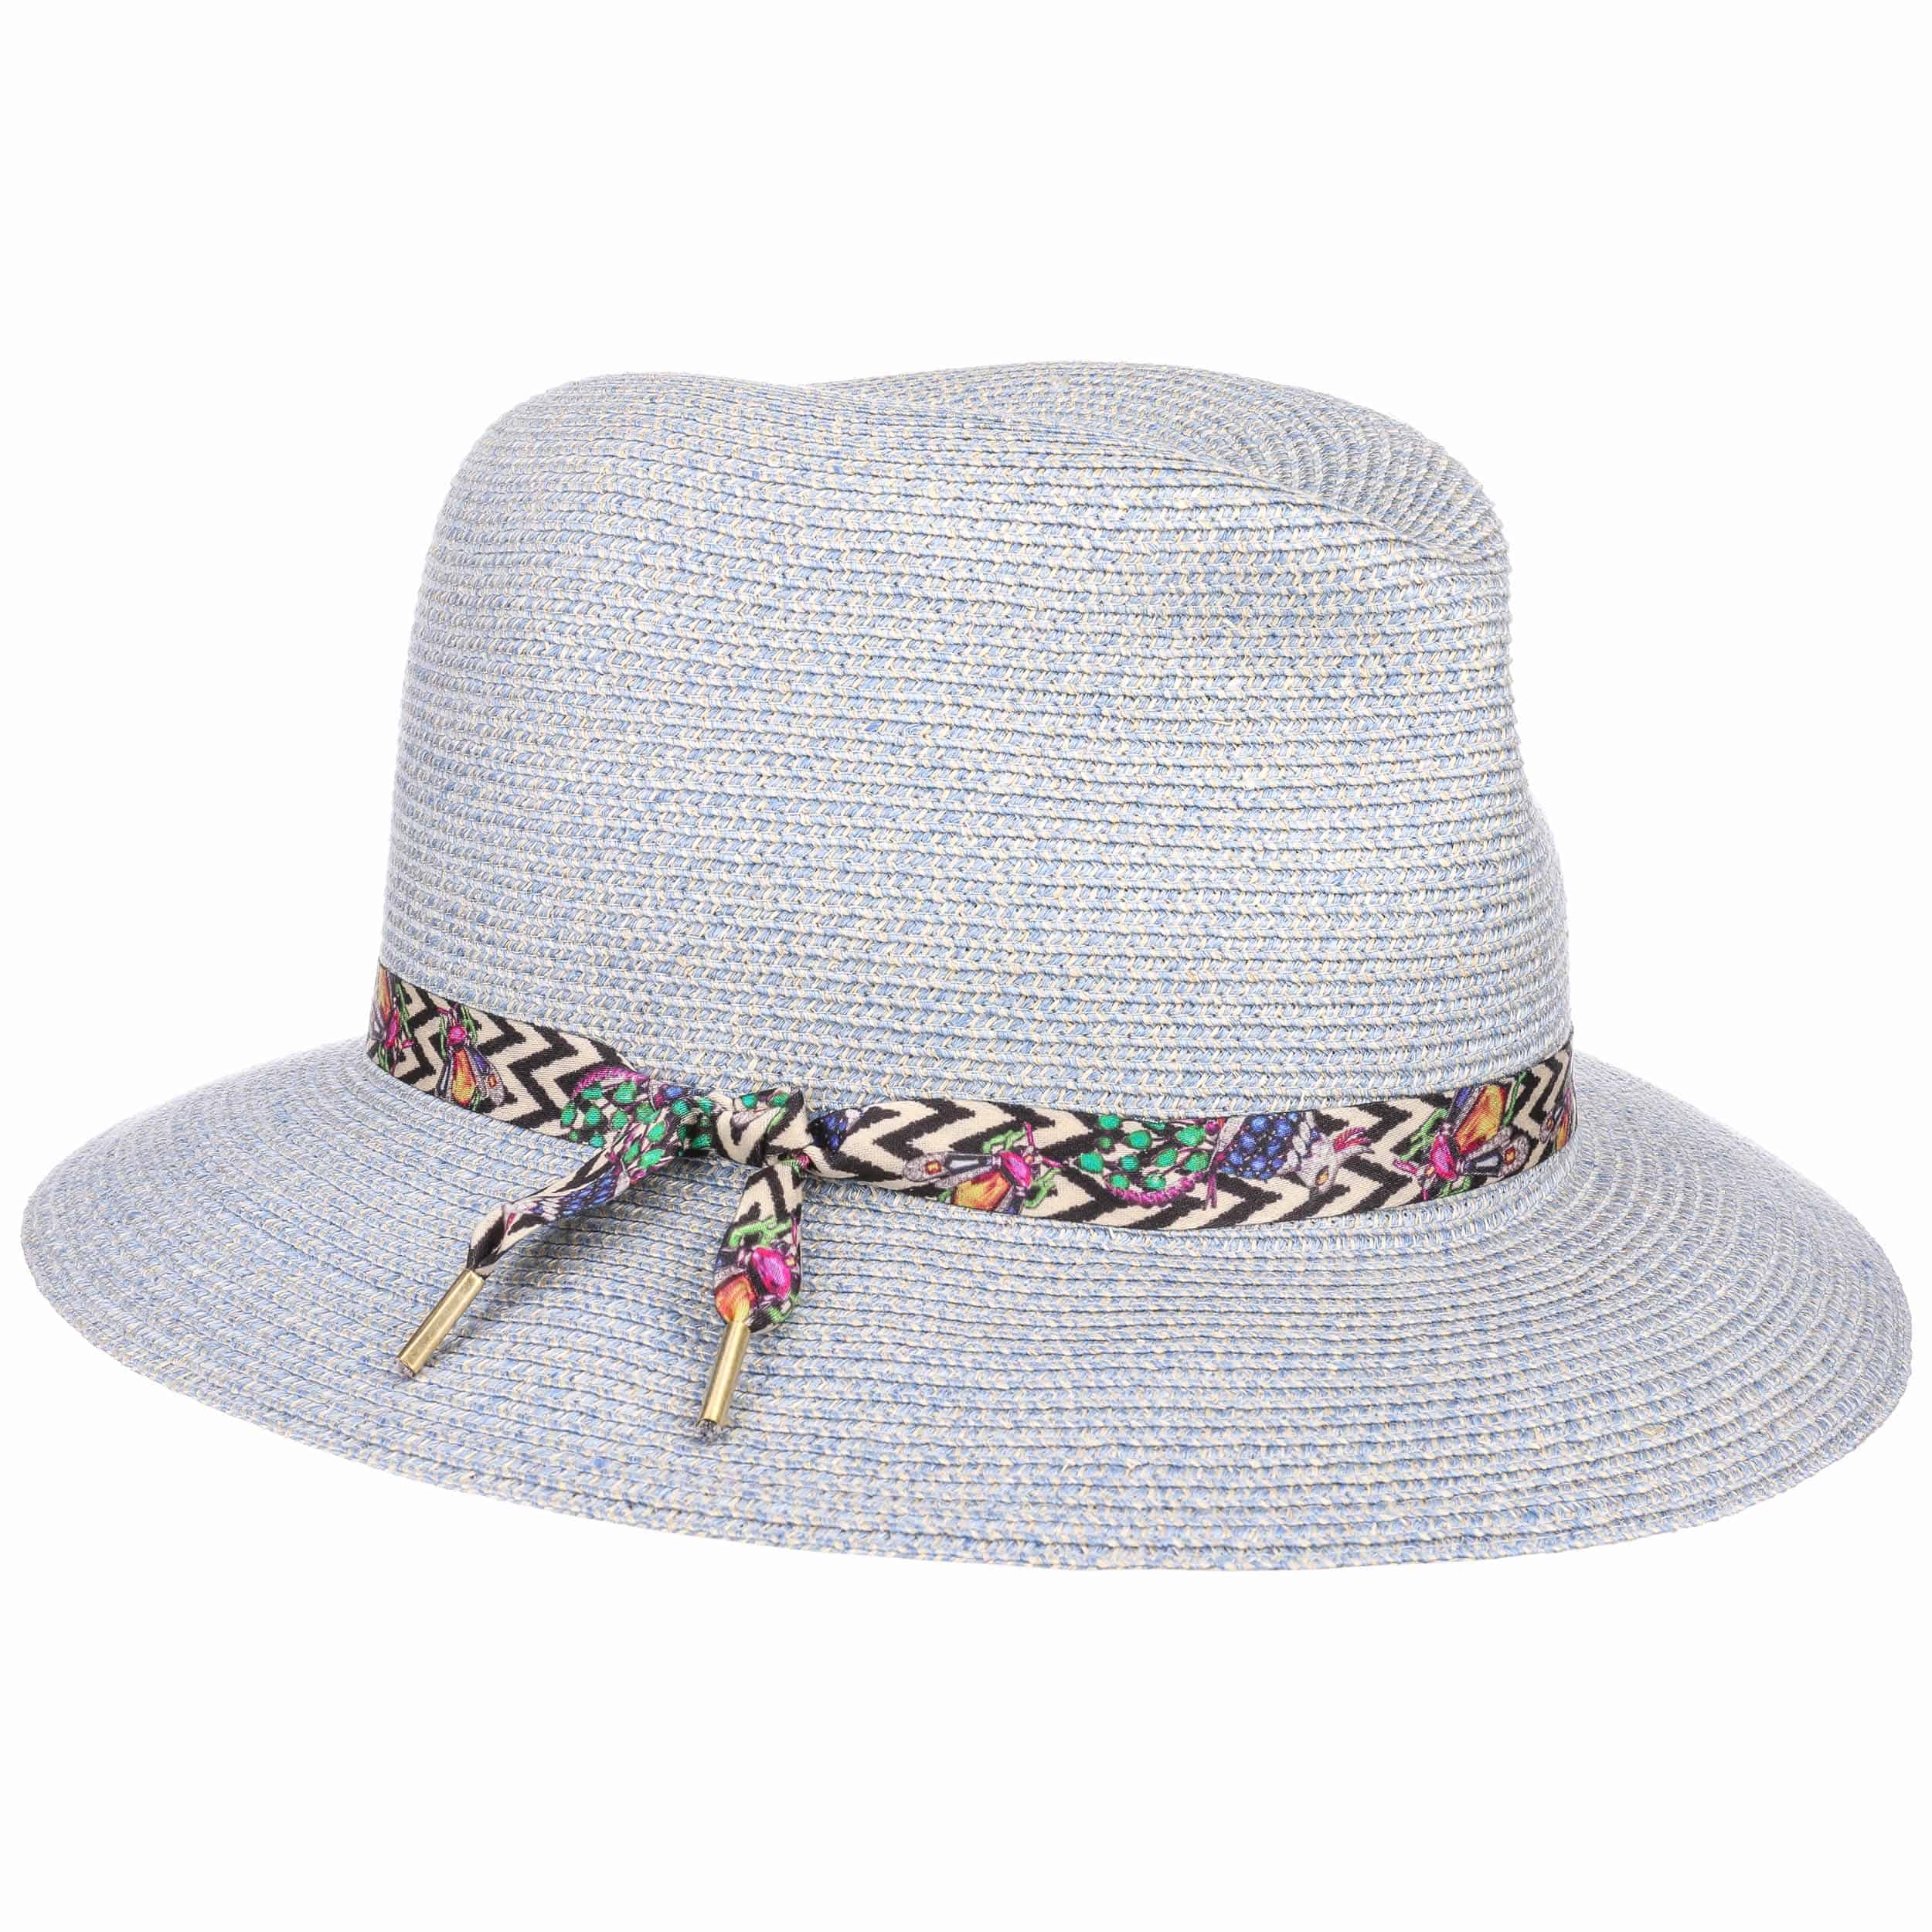 large size Everyday cotton summer hat 59-60cm